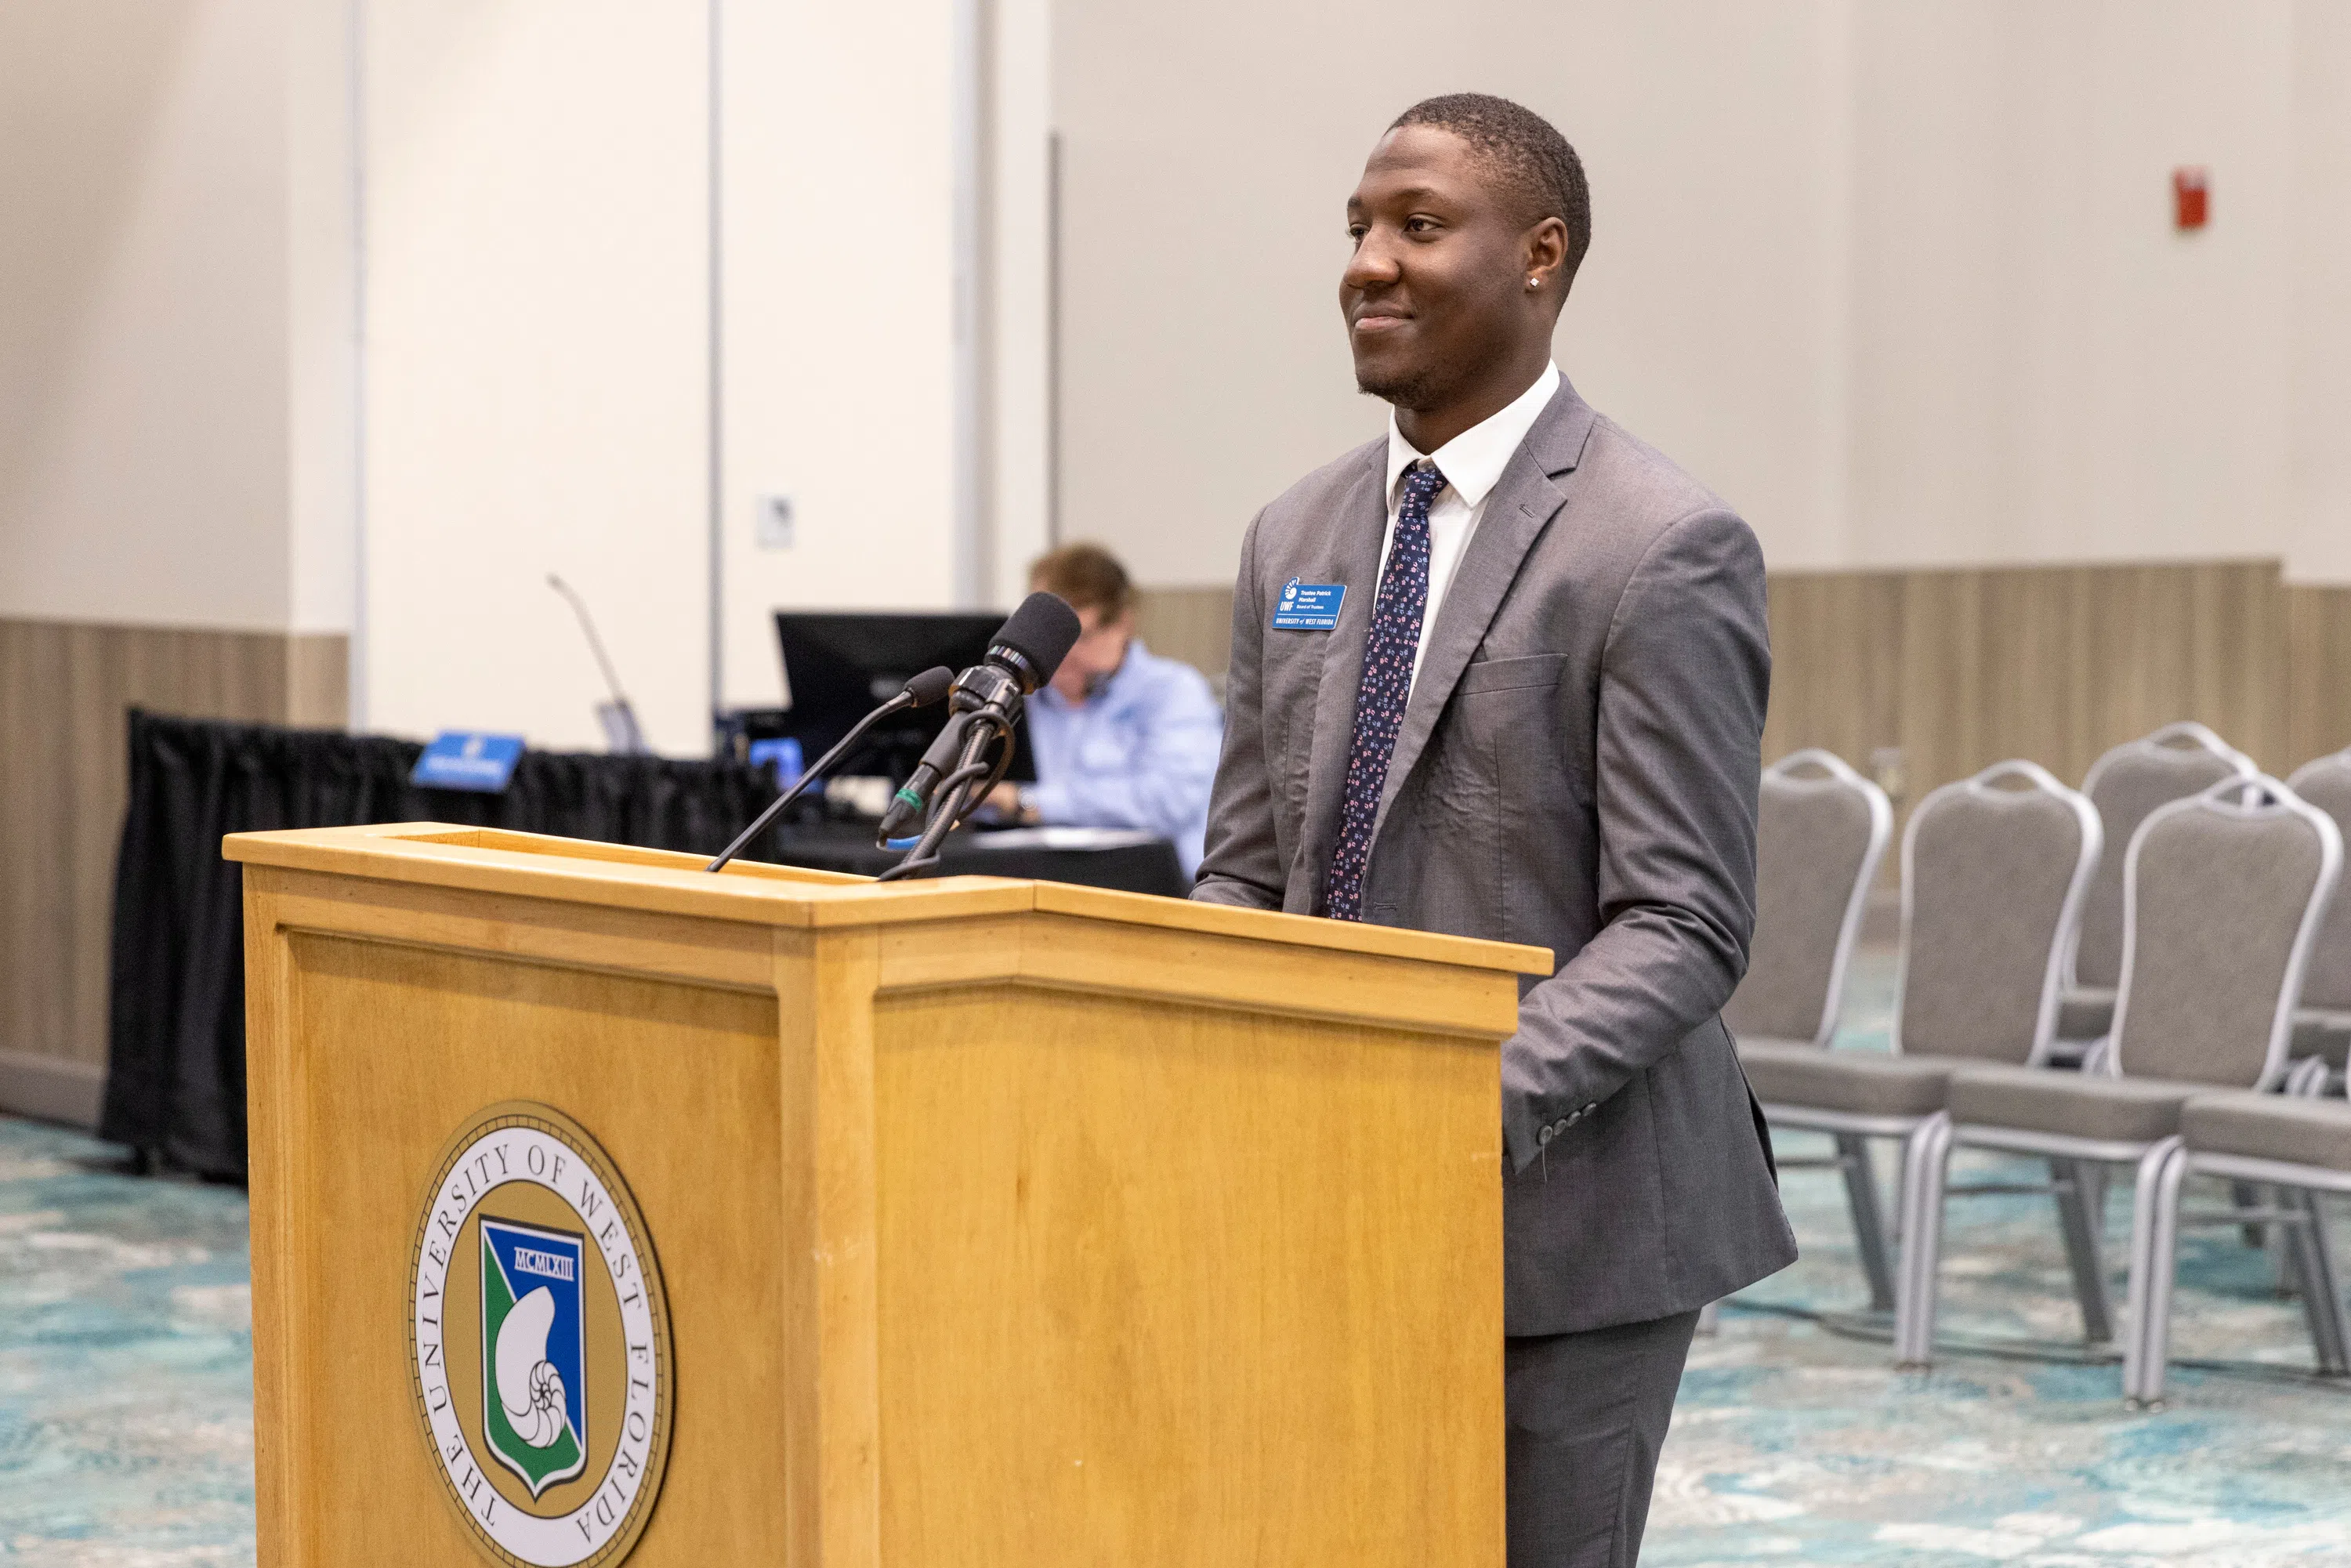 Student speaking in at a podium in the conference center